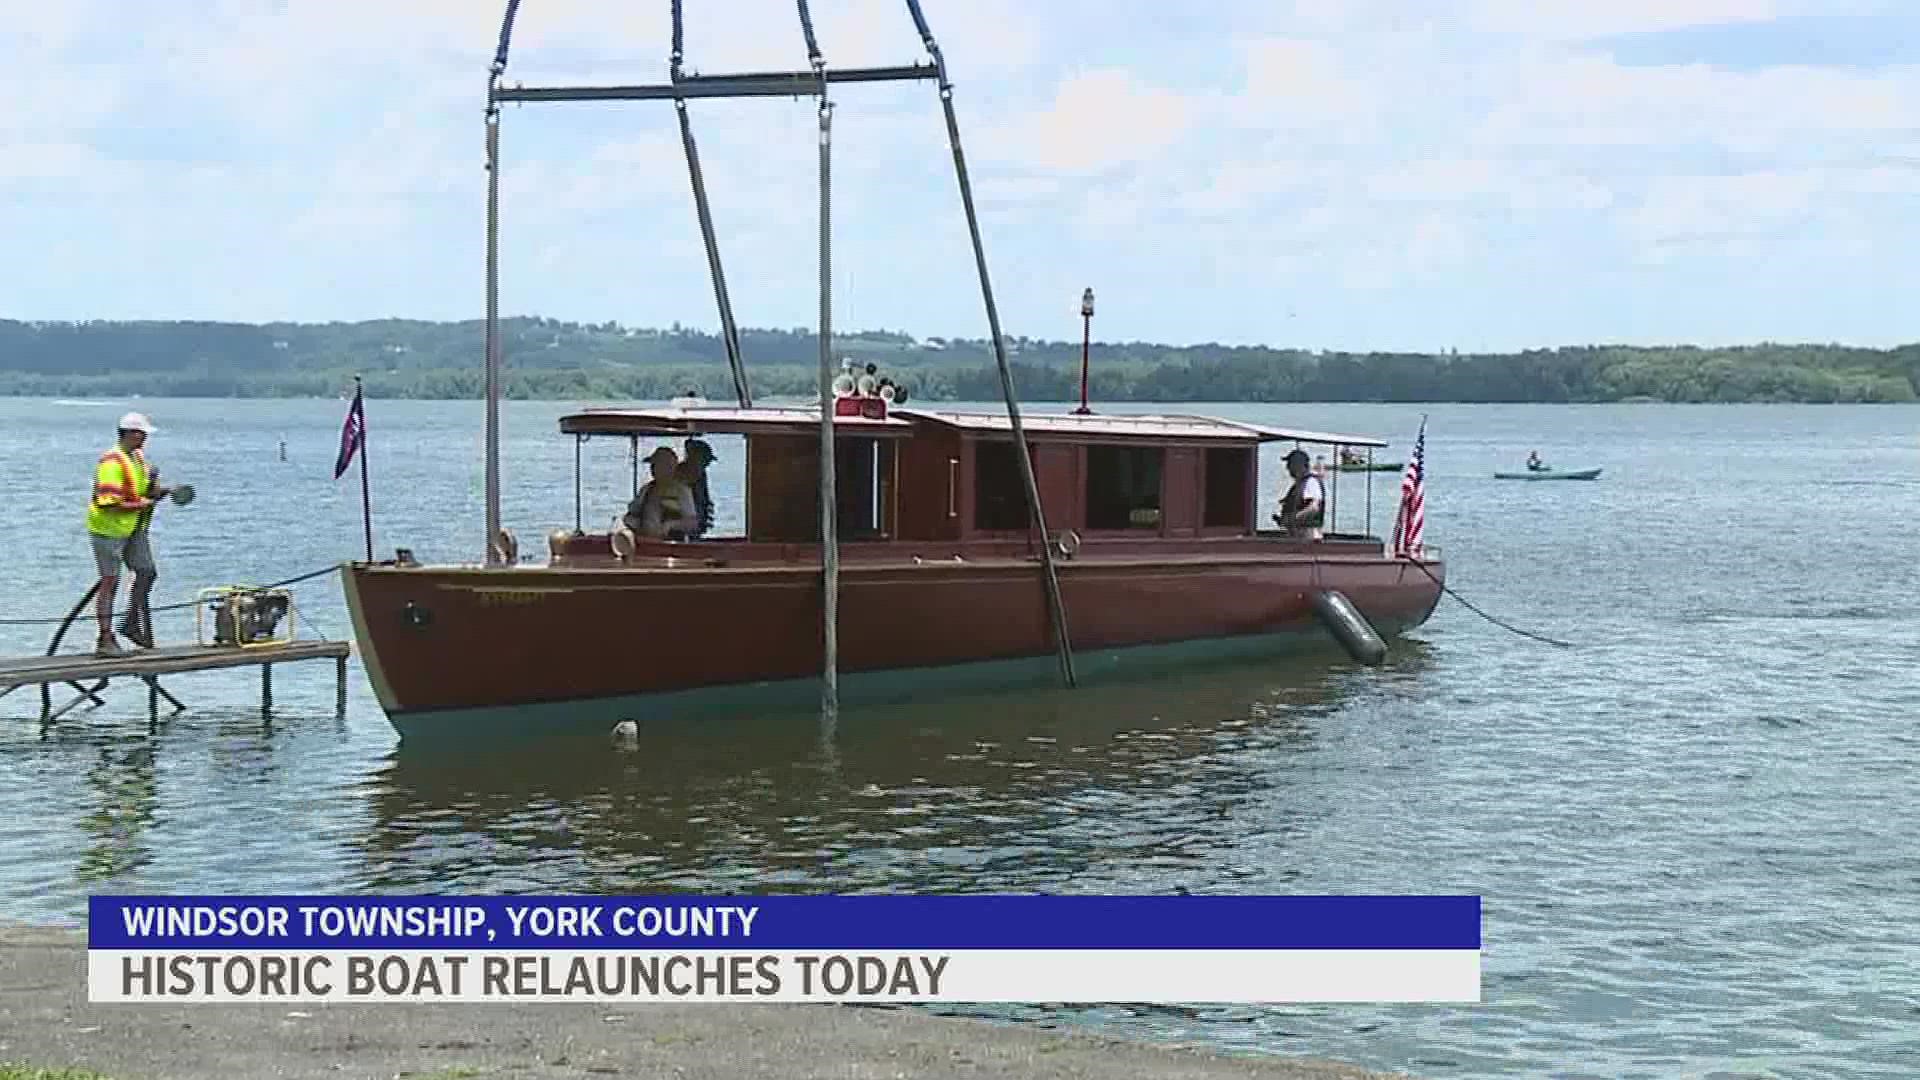 The Chief Uncas, an electric boat built in 1912, was relaunched. The vessel will undergo a month of testing before becoming a tour boat on the Susquehanna River.